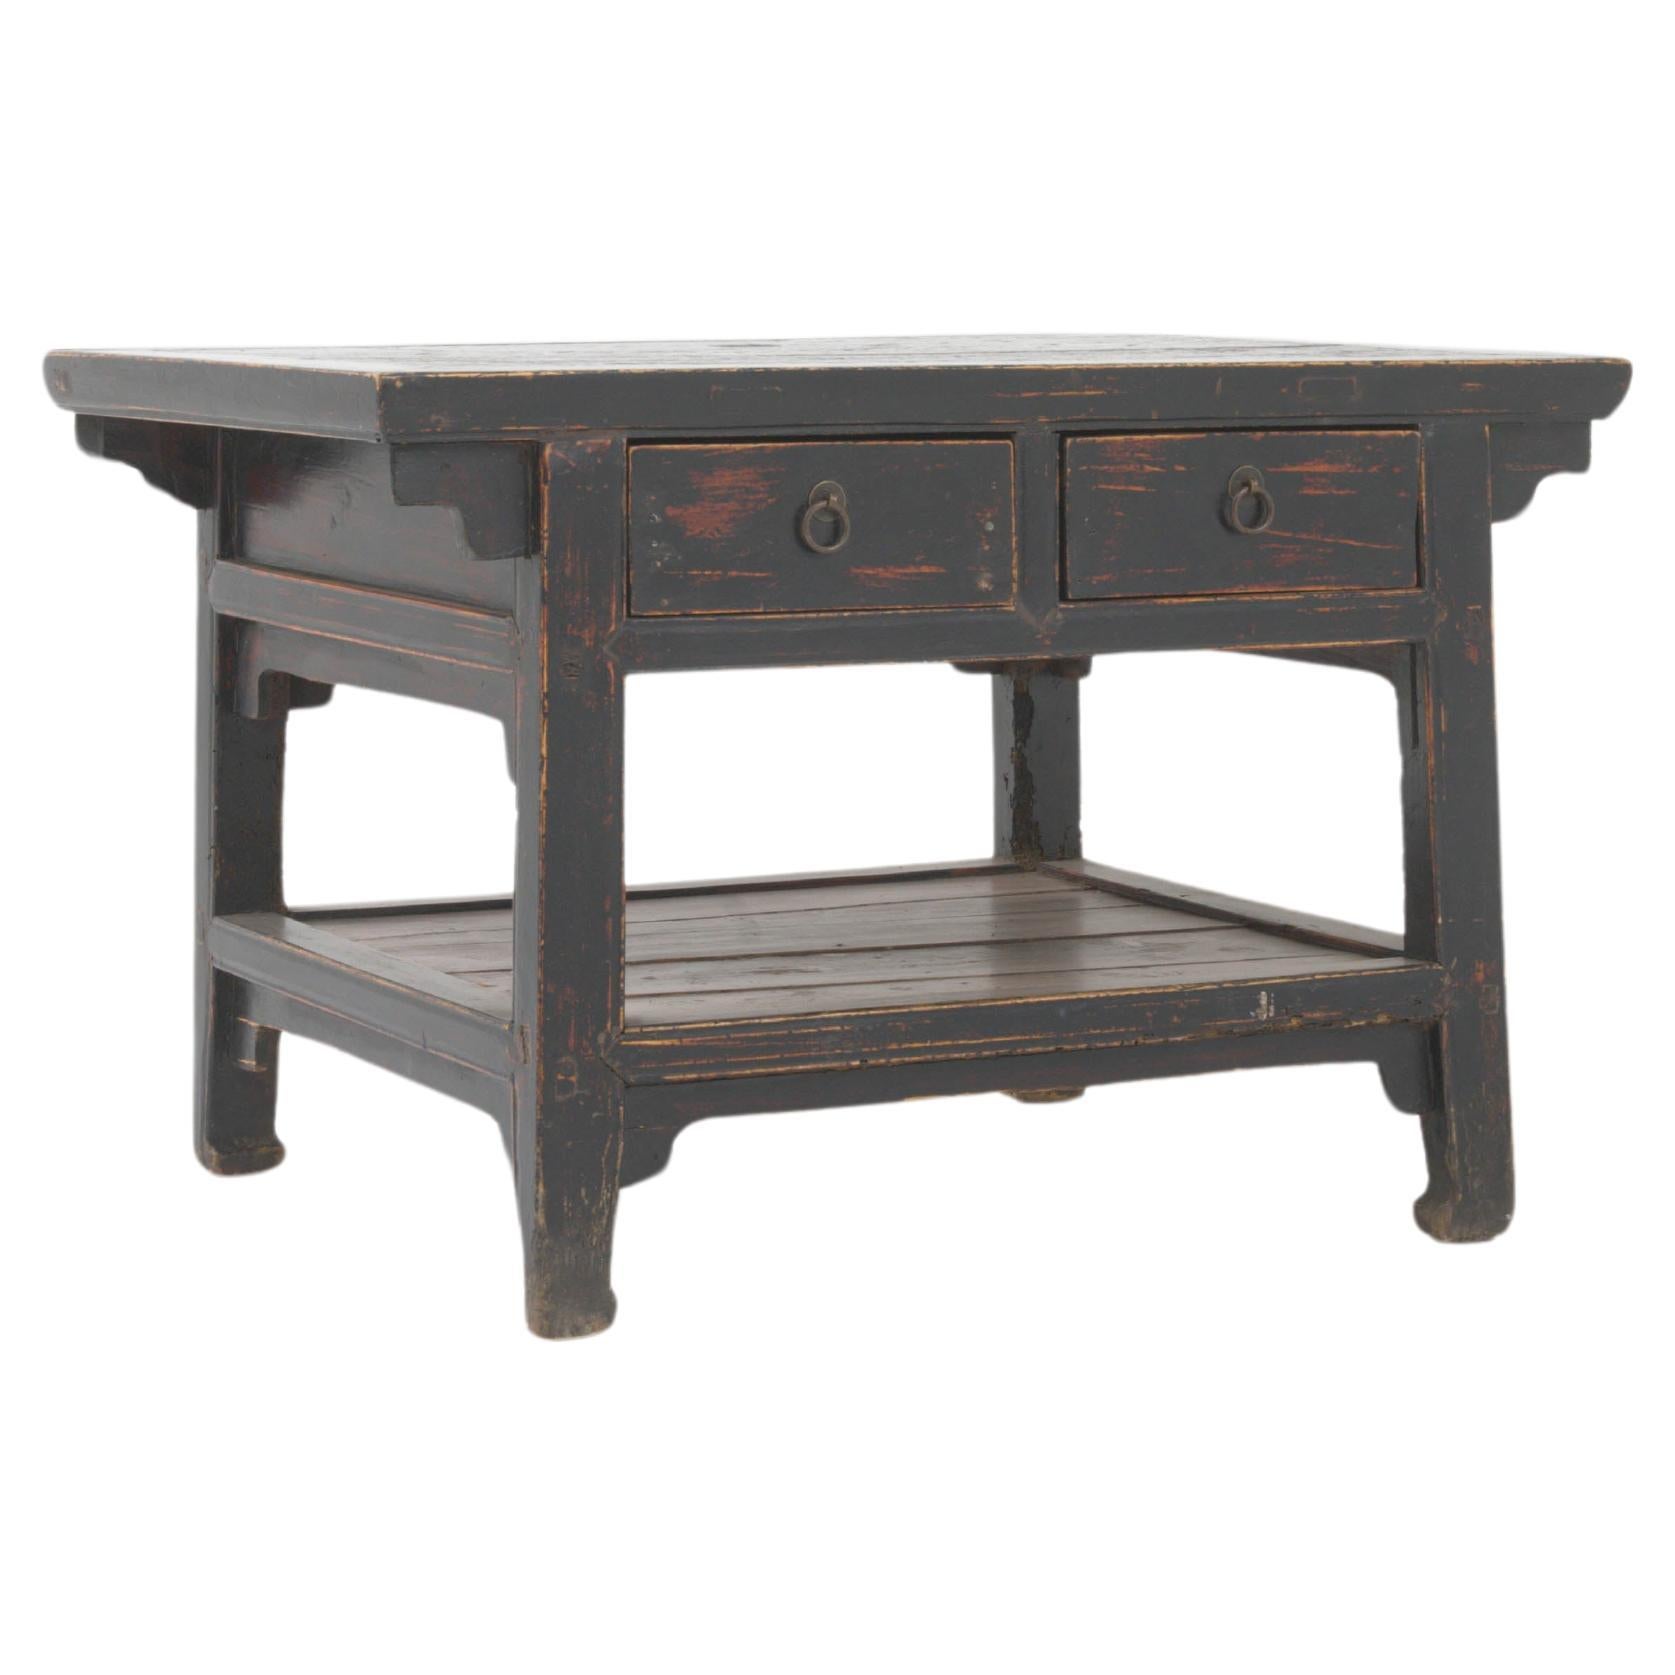 19th Century Chinese Wooden Coffee Table